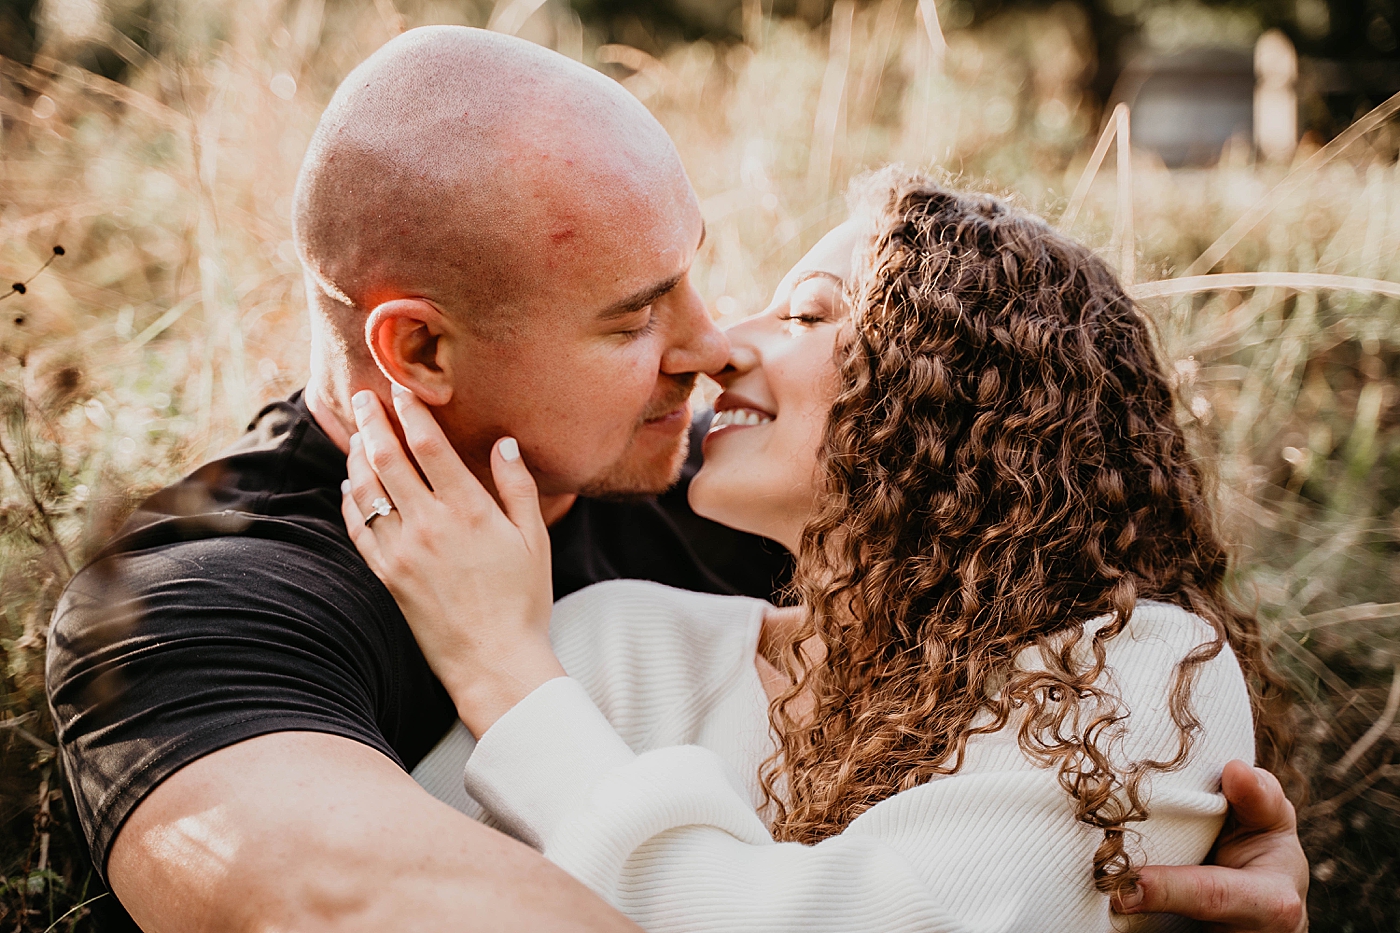 Closeup of couple holding each other about to kiss each other Romantic Riverbend Park Engagement Photography captured by South Florida Photographer Krystal Capone Photography